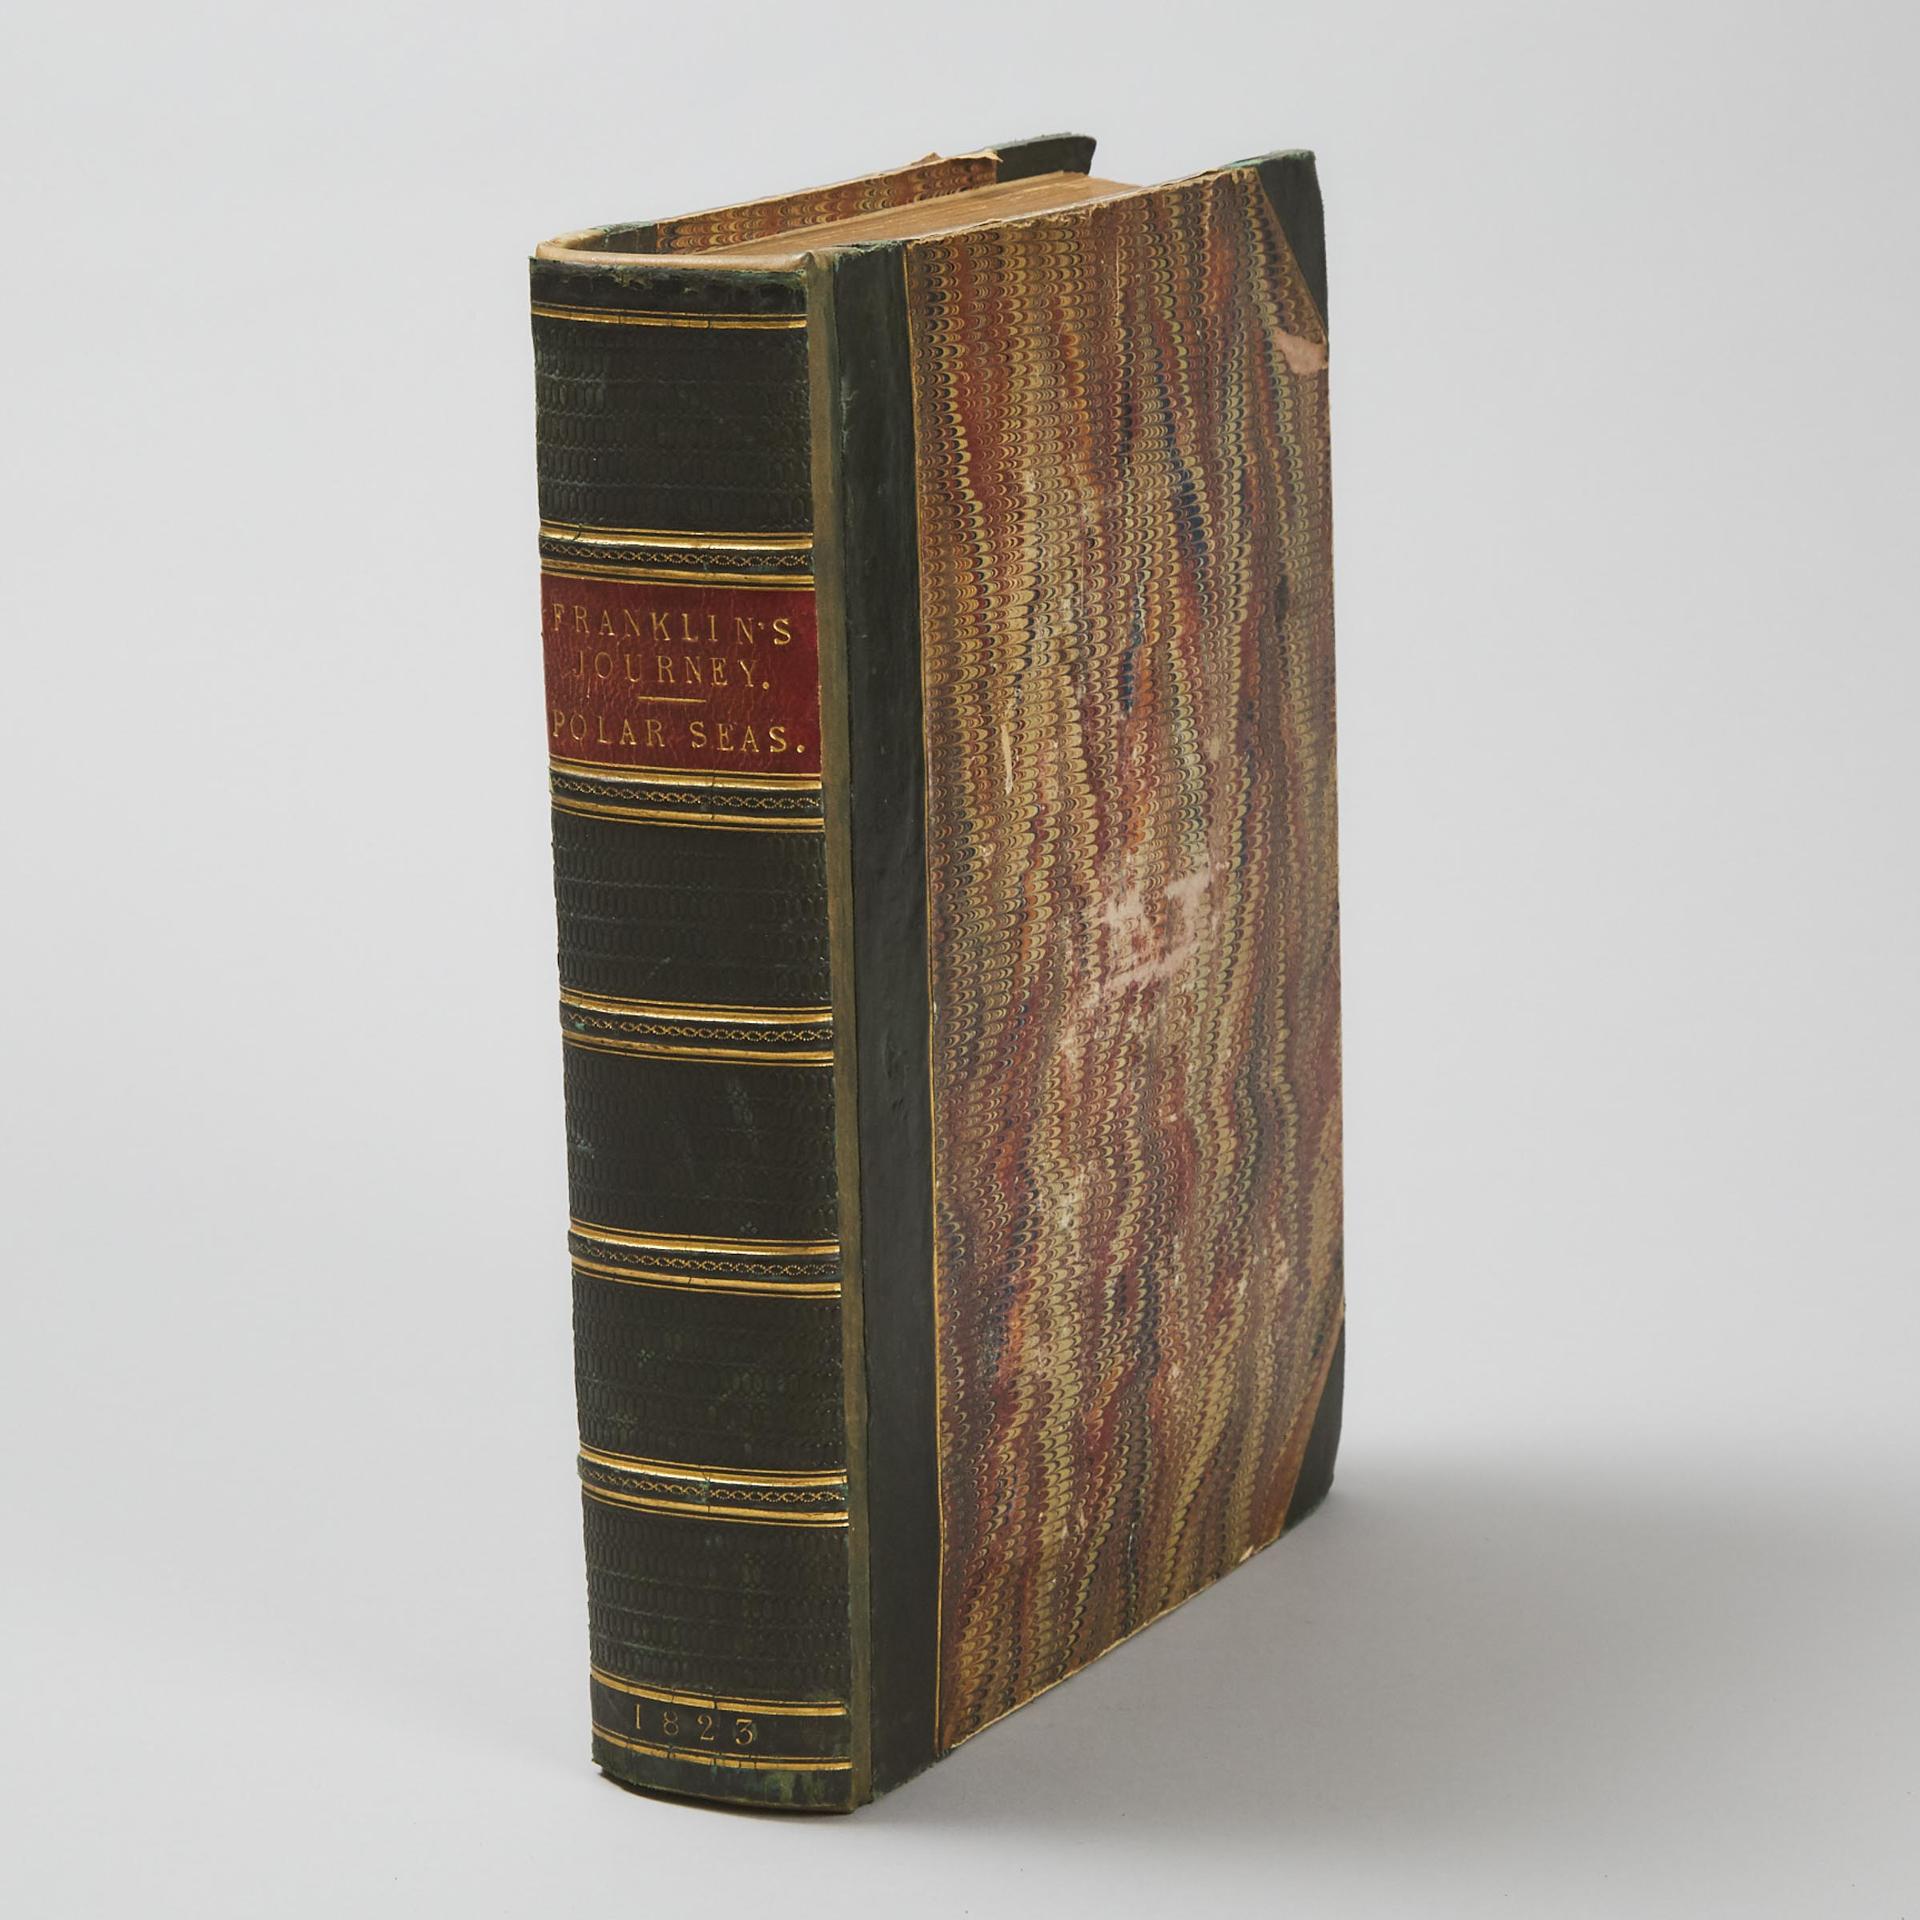 Sir John Franklin - Narrative Of A Journey To The Shores Of The Polar Sea In The Years 1819, 20, 21, And 22